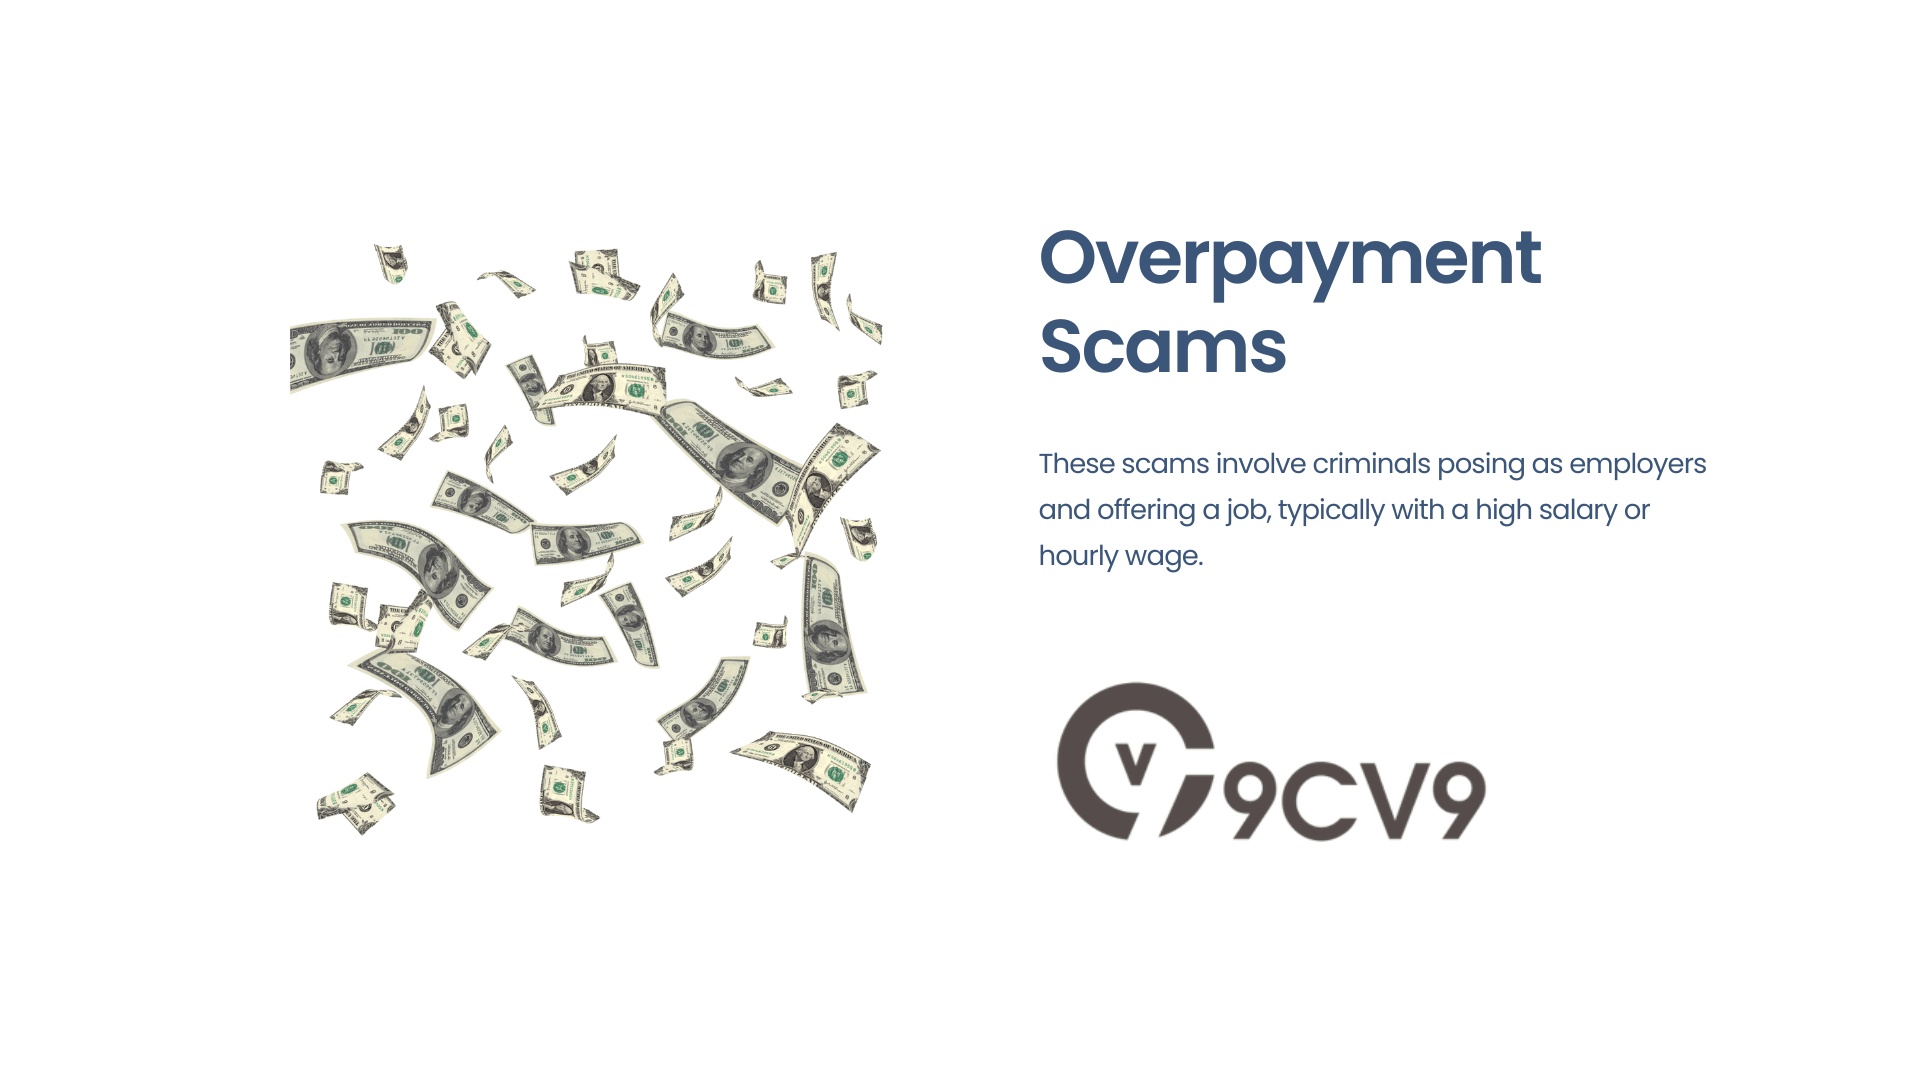 Overpayment Scams